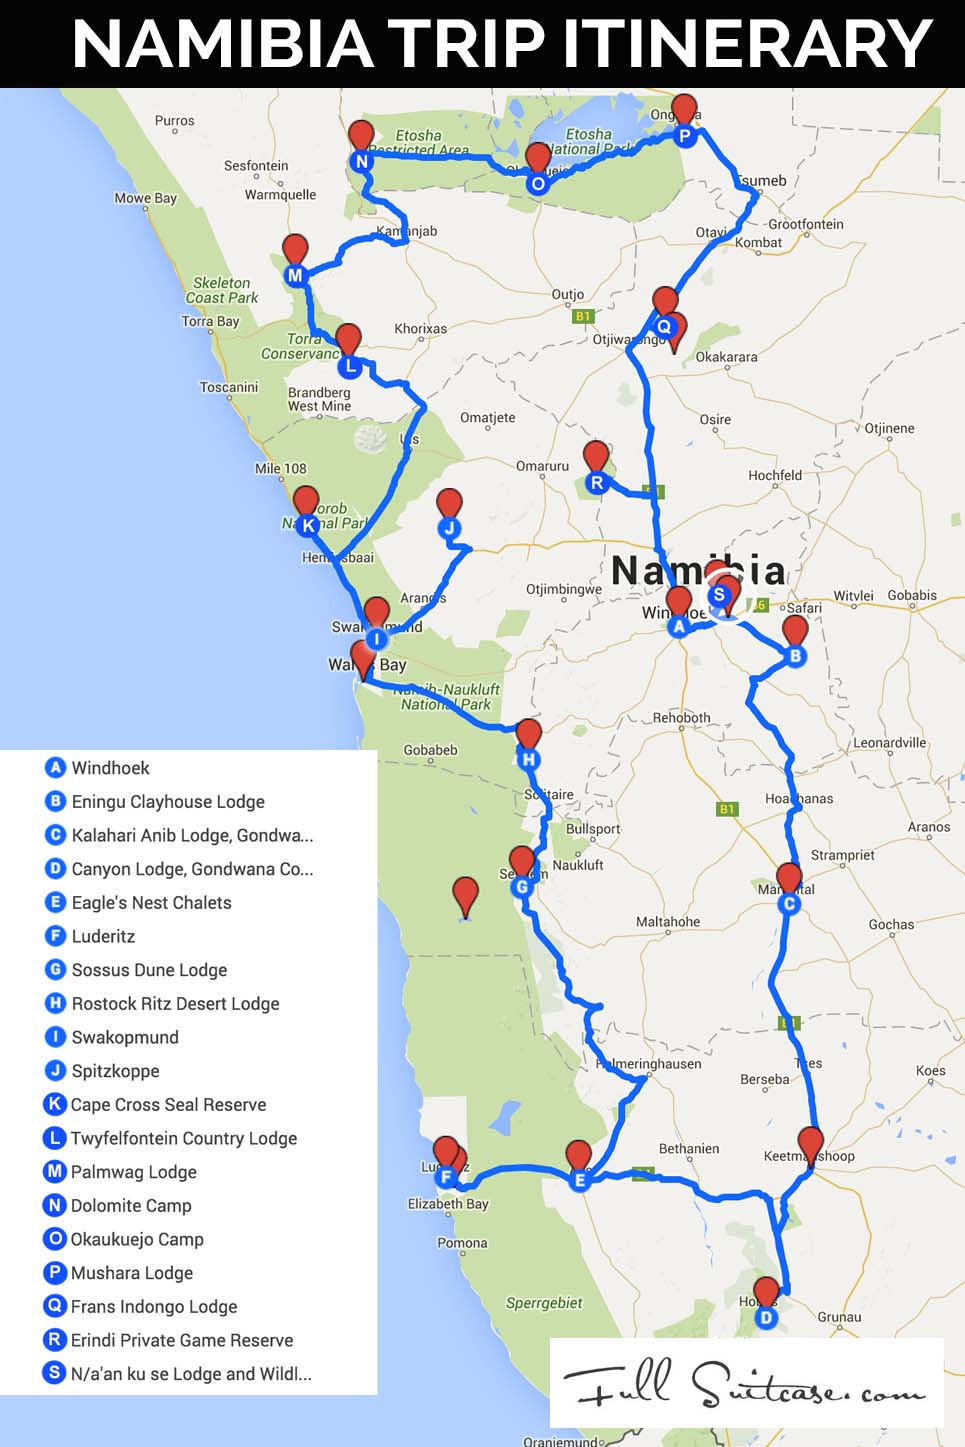 Complete Namibia trip itinerary map